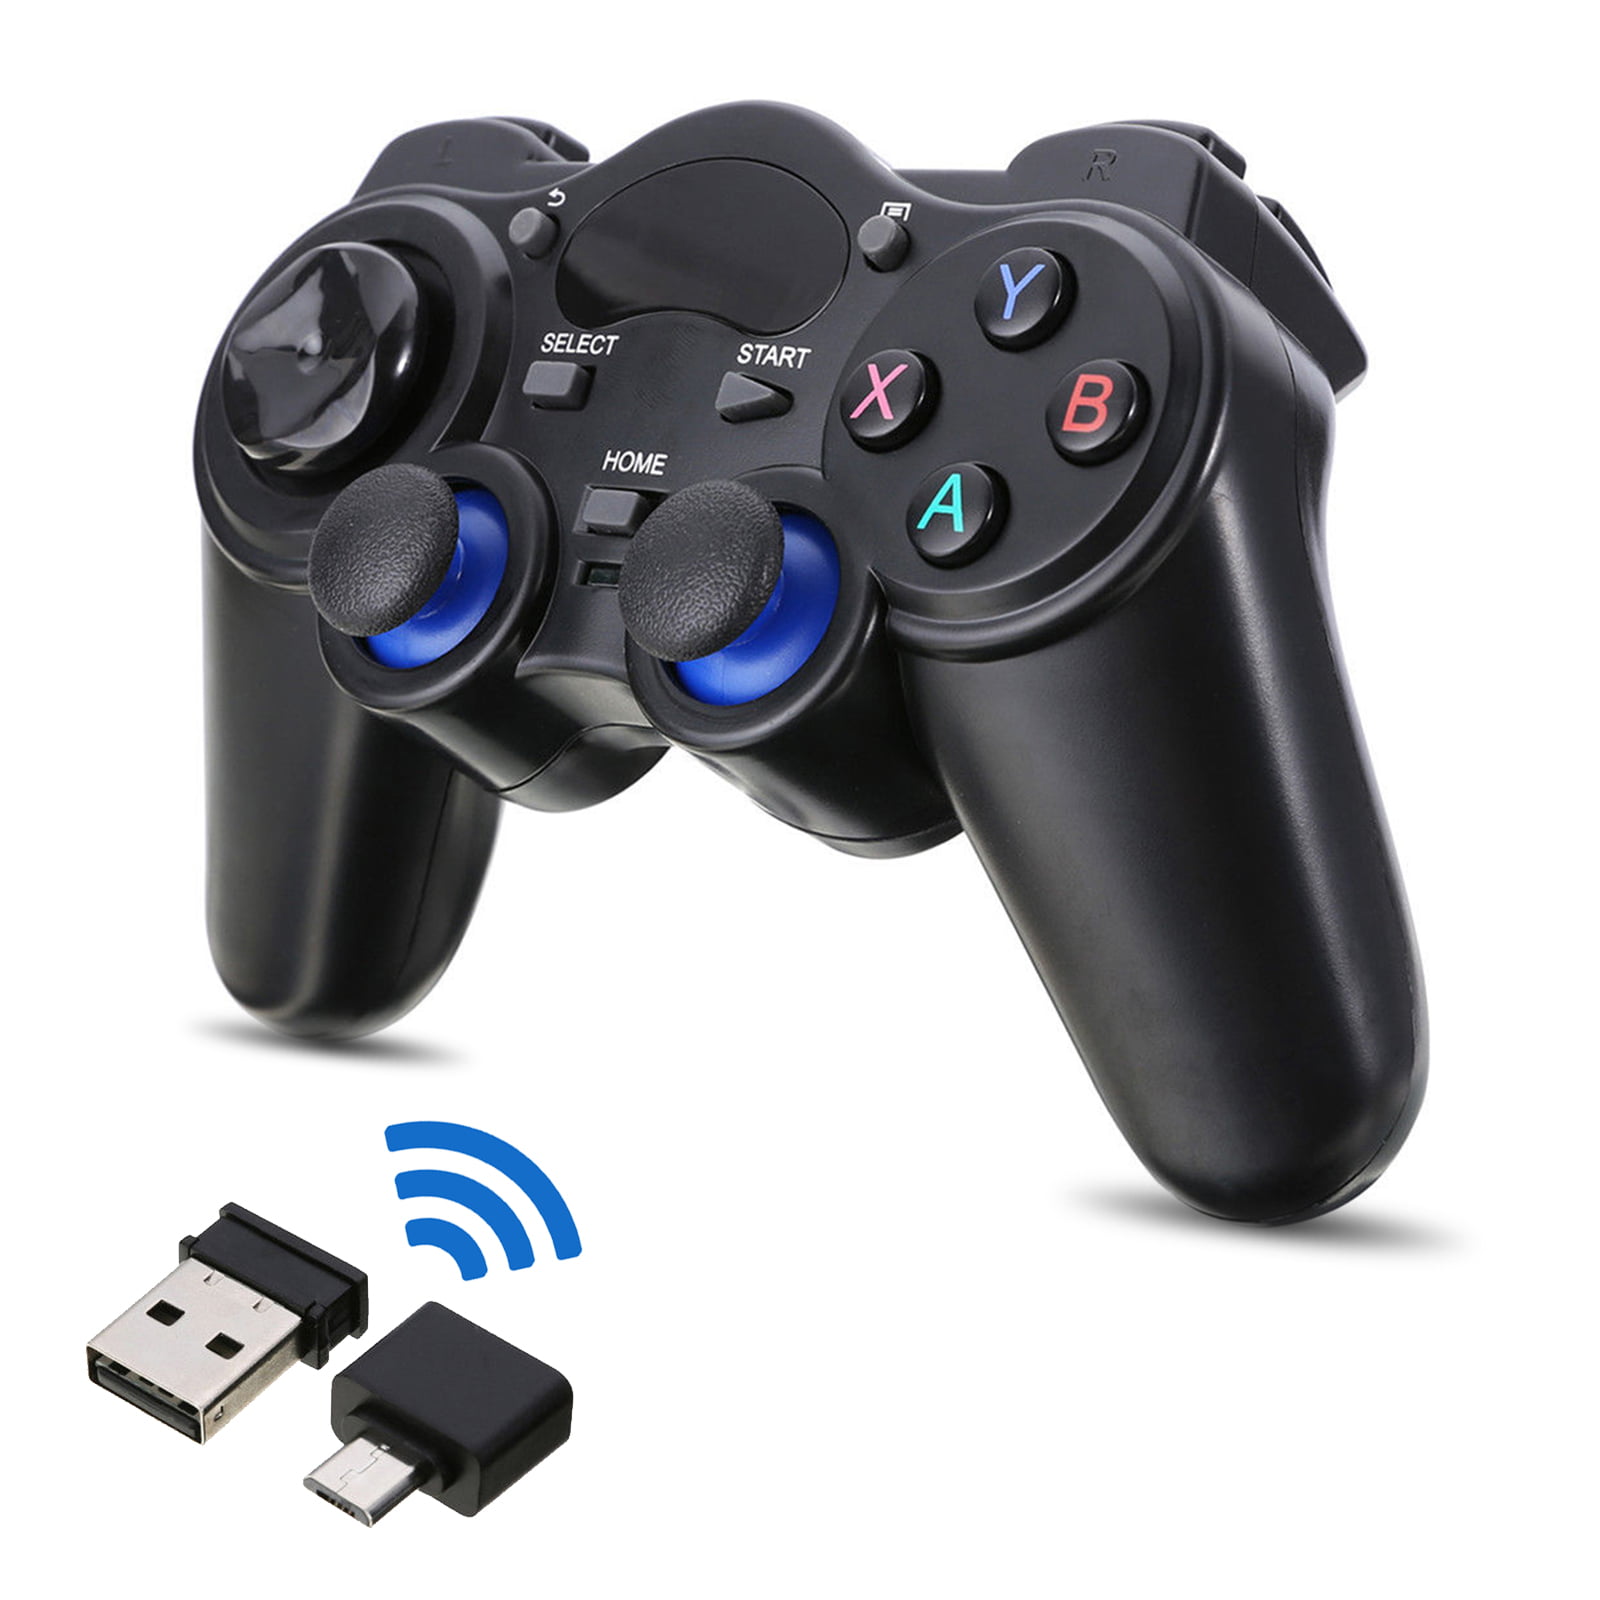 Tsv 2 4ghz Wireless Controller For Ps3 Android Steam Pc Windows 10 8 1 8 7 Not Support The Xbox 360 One Black 1 Pack Walmart Com